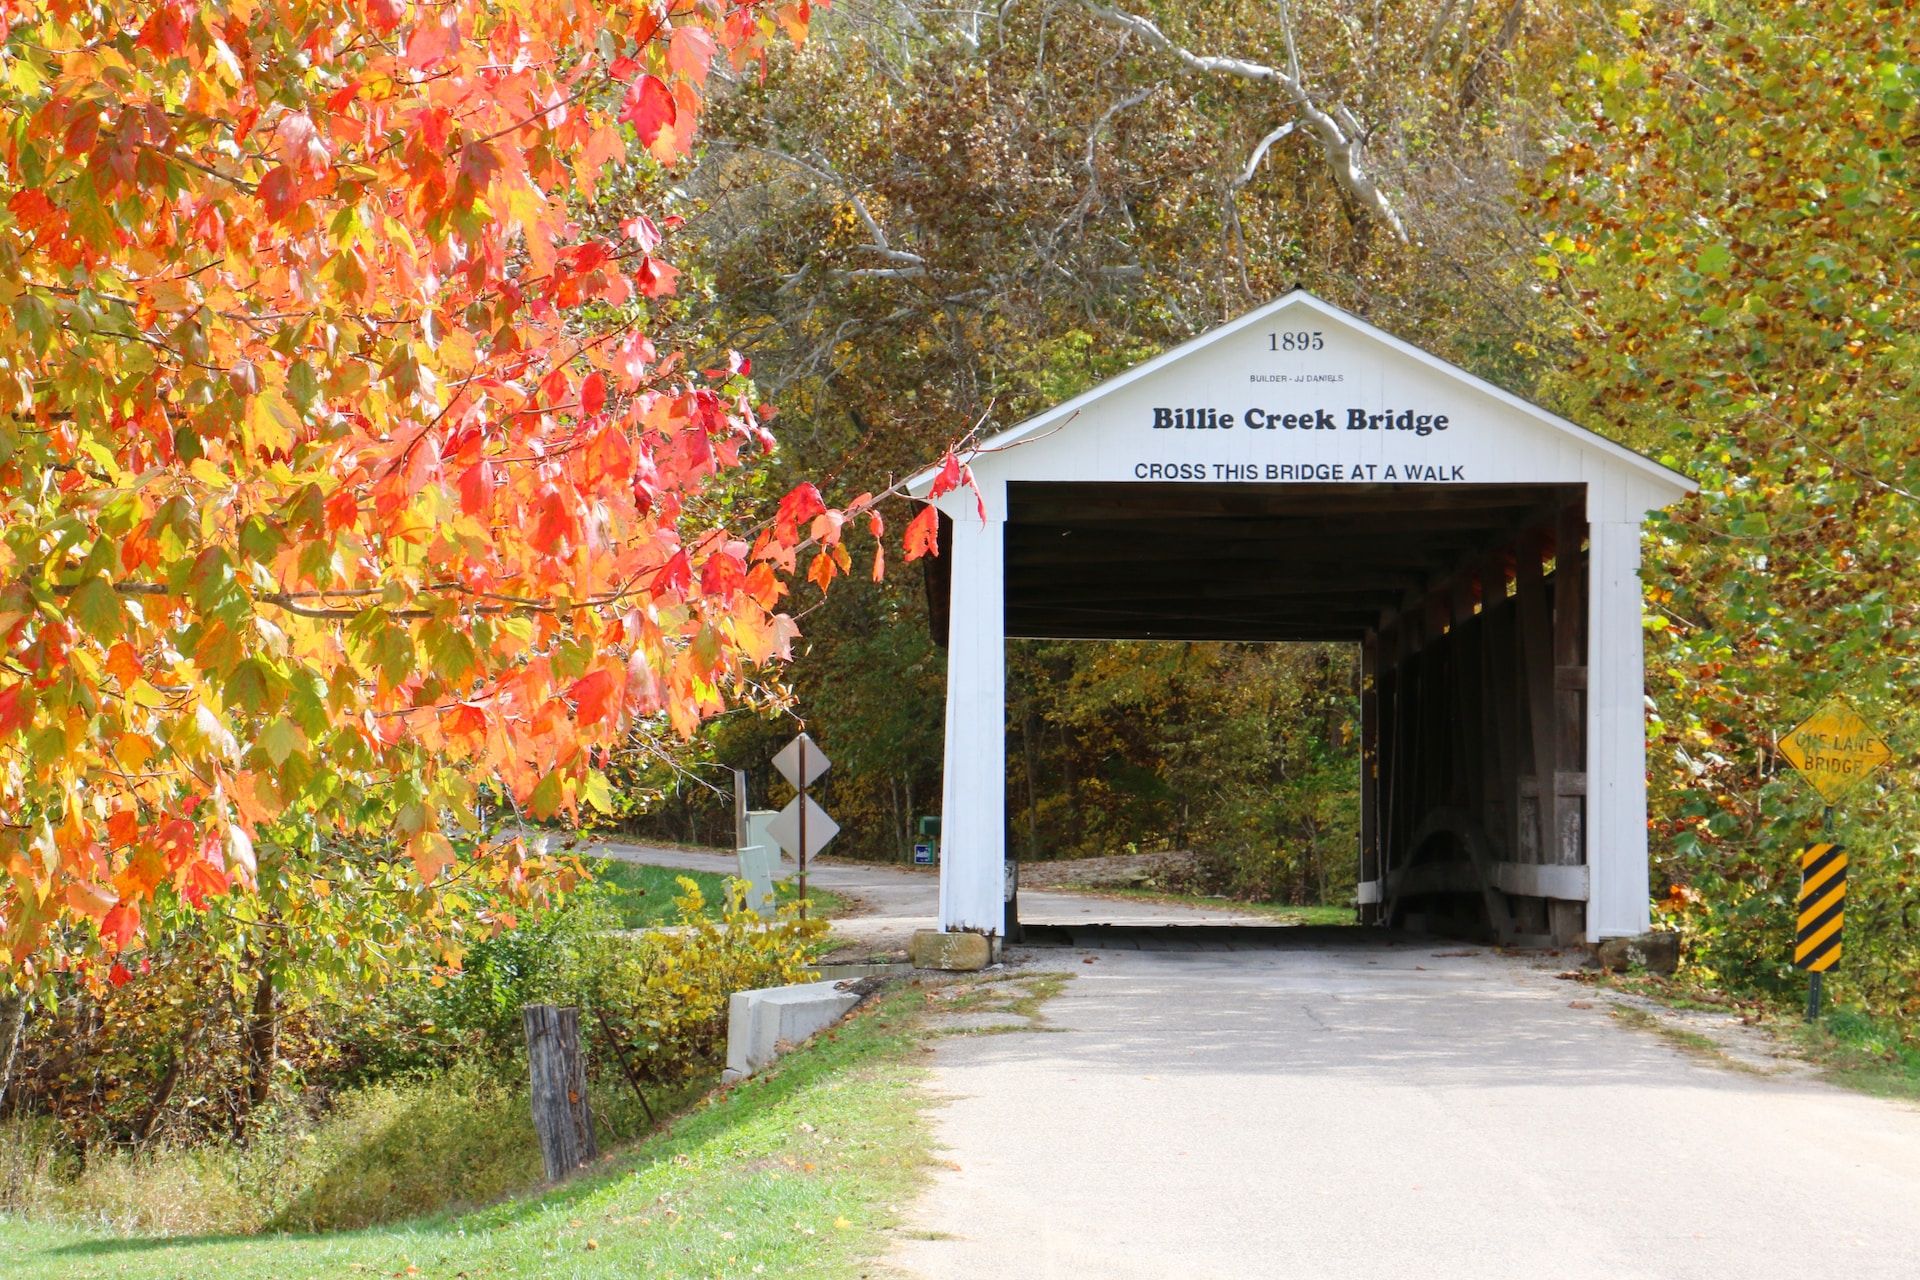 The Billie Creek Covered Bridge in Parke County, Indiana